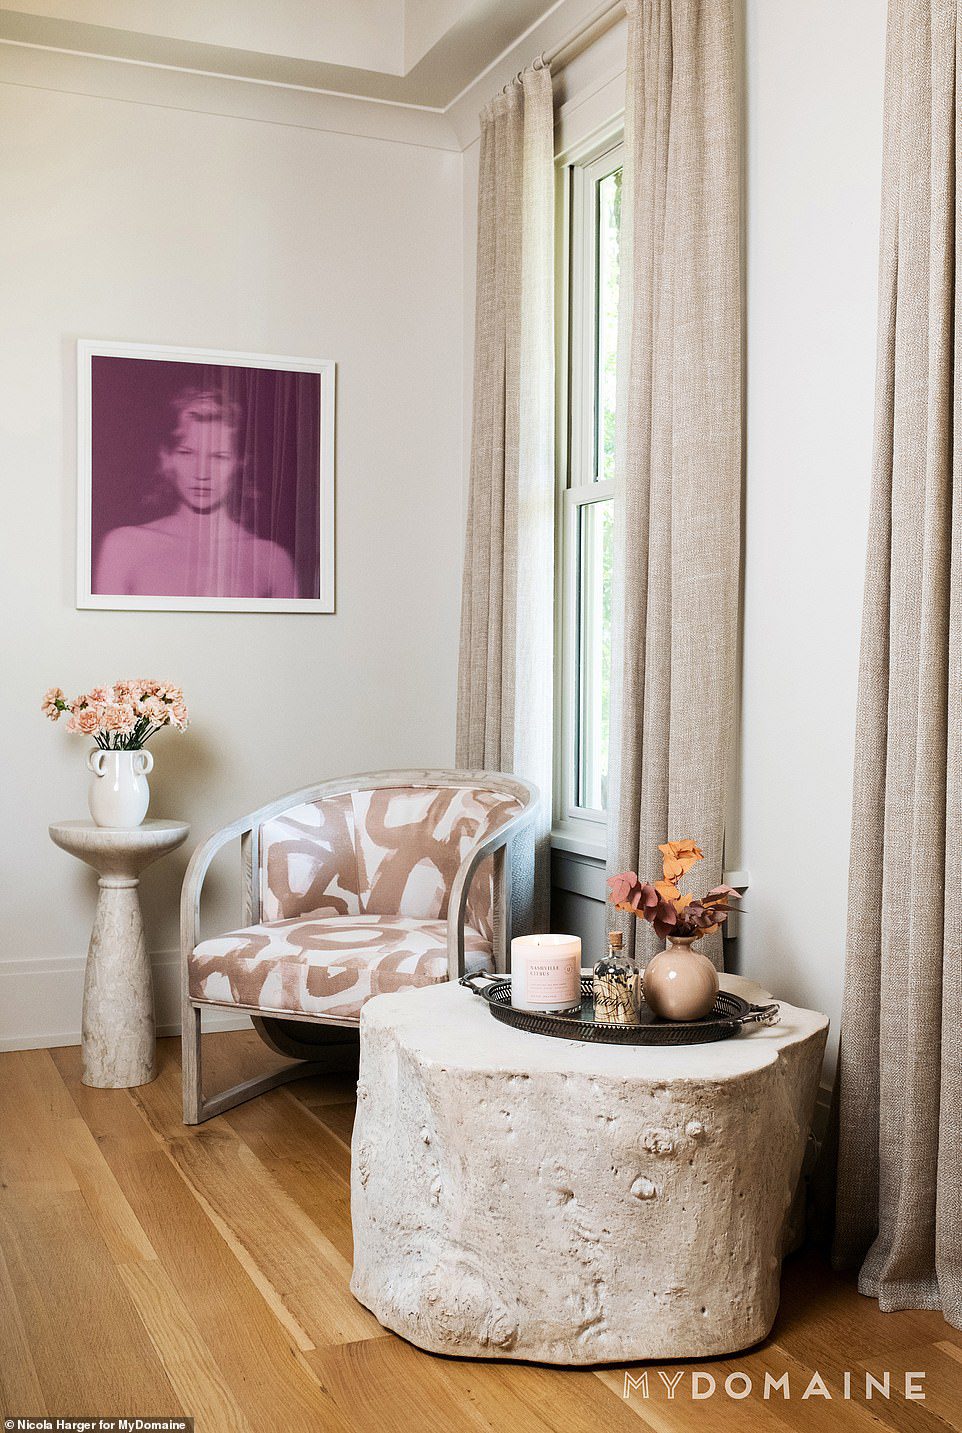 HER OFFICE: Cavallari's office, where the blonde beauty conducts Zoom meetings and business affairs, is a quiet, neutral-toned space complete with a big, pink portrait of her famous idol, supermodel Kate Moss.